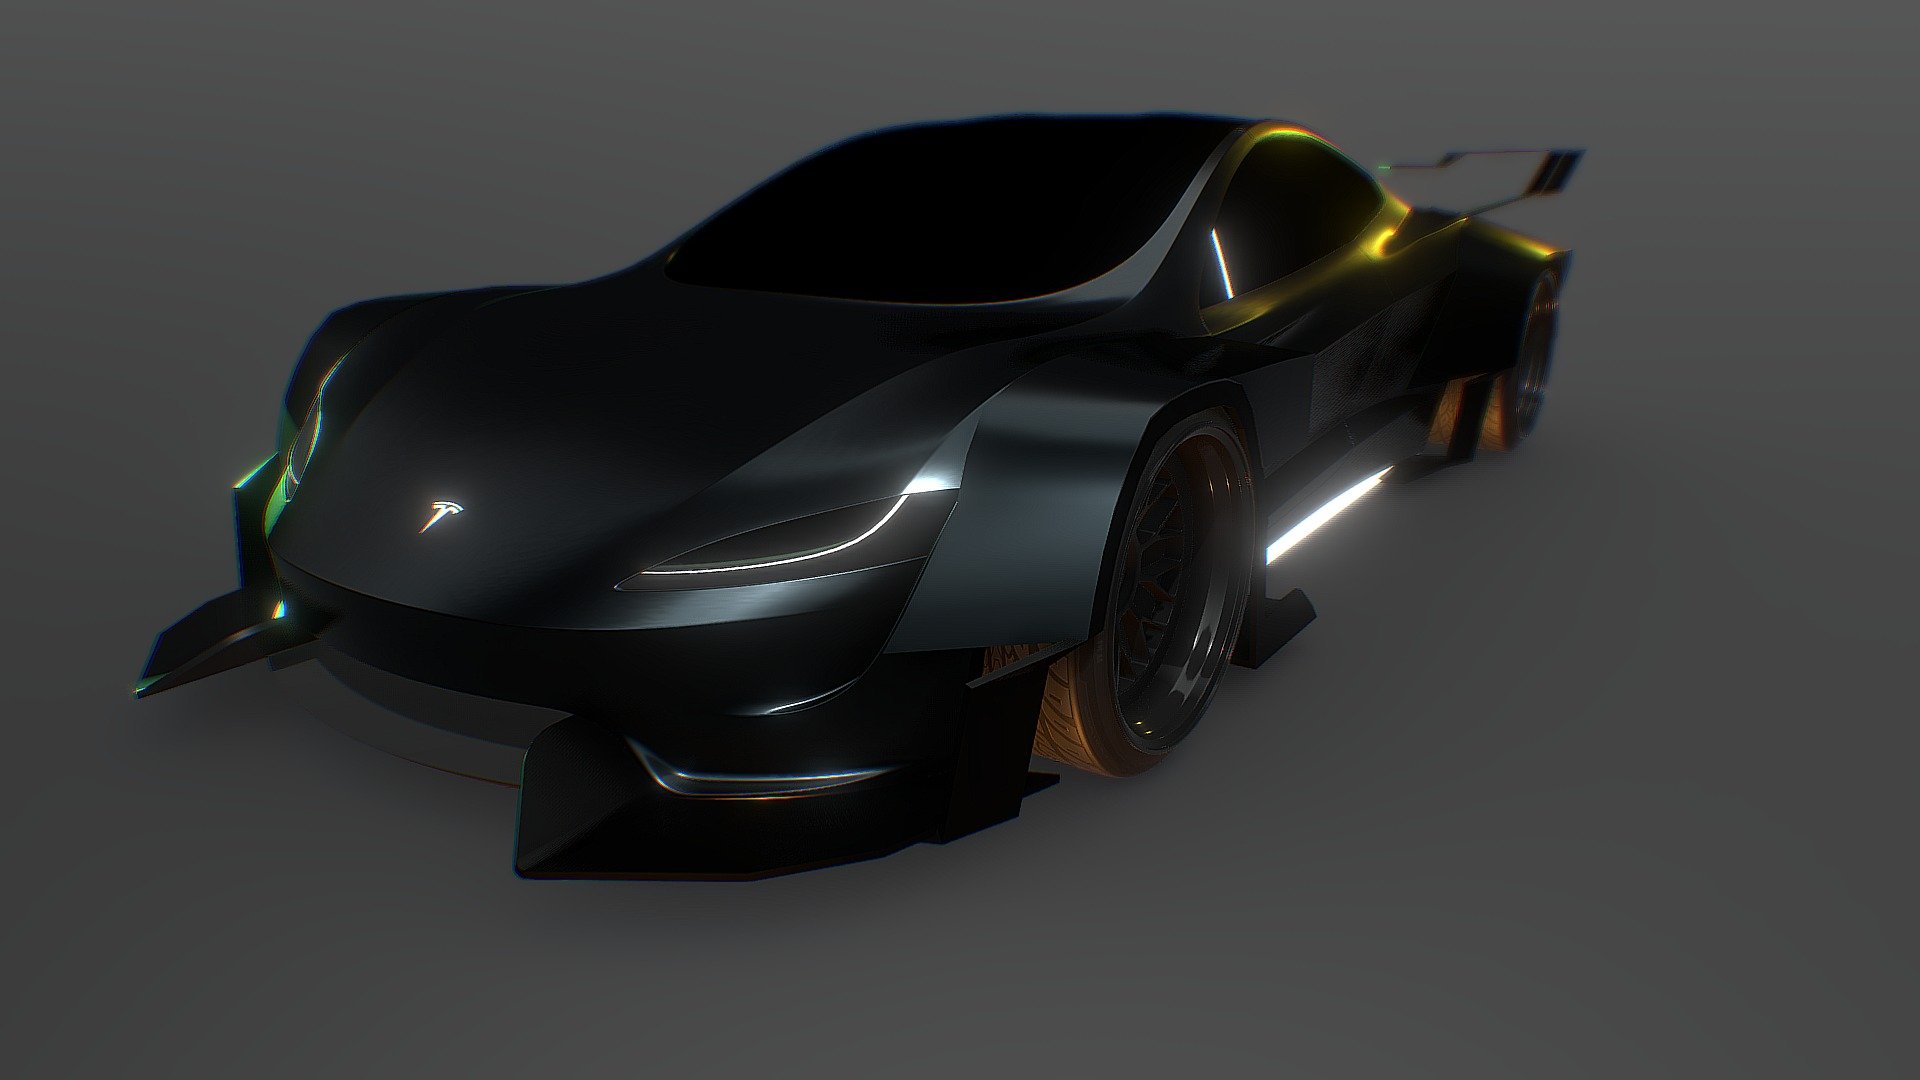 For all model i use you can find it on my likes model.
Don't forget
- my channel Dev365TH
- my web site Dev365TH.com
- credit me - Tesla roadster best quelity - Download Free 3D model by Dev365TH (@dec365th) 3d model